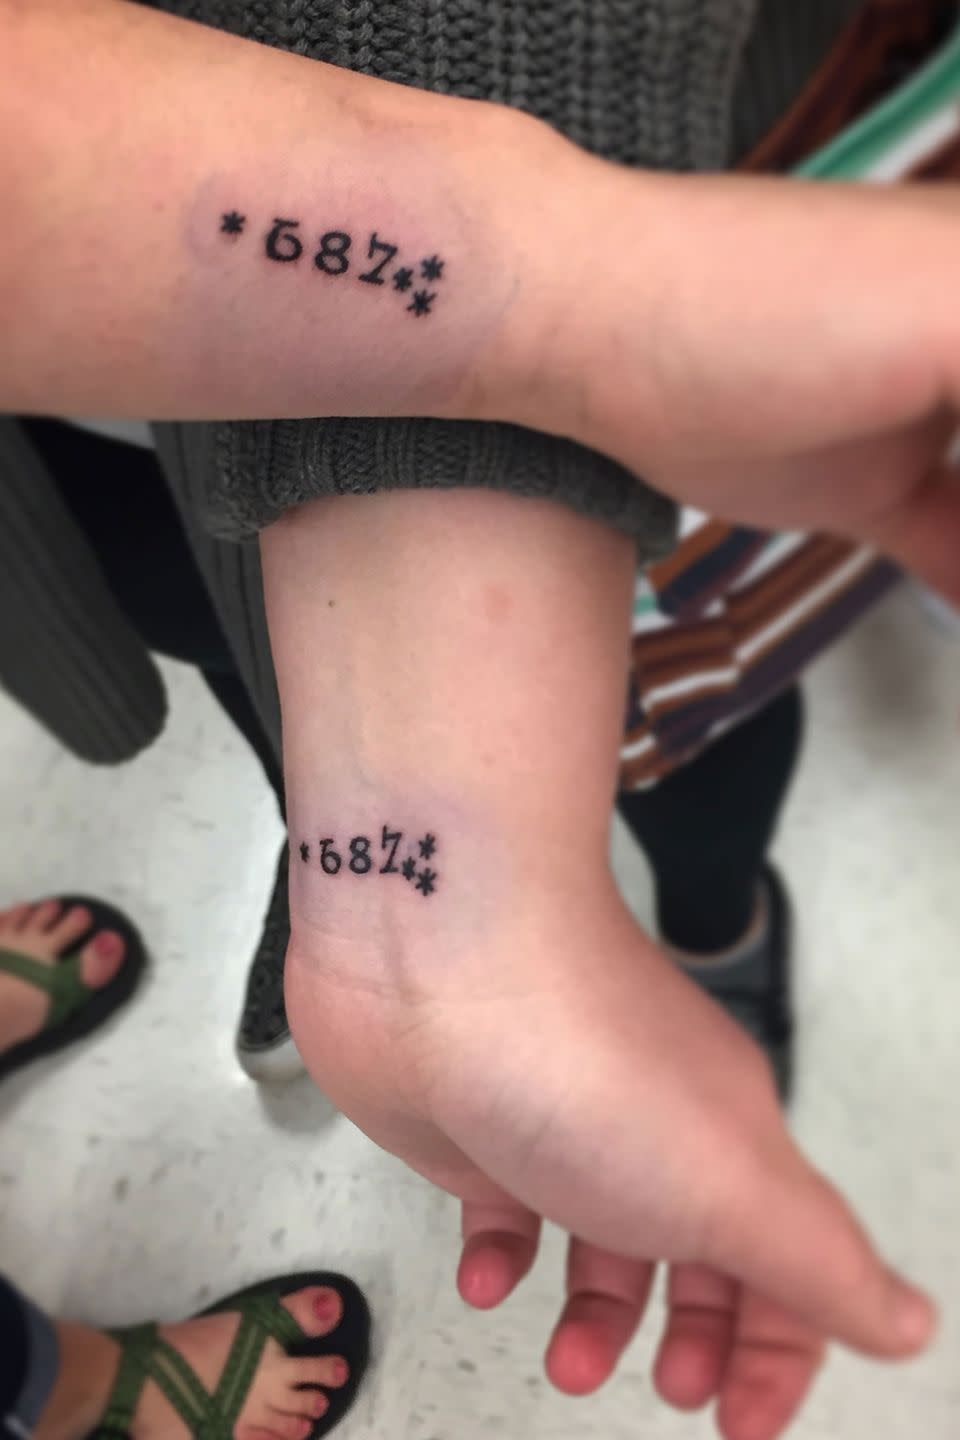 28) This Harry Potter Mother-Daughter Tattoo